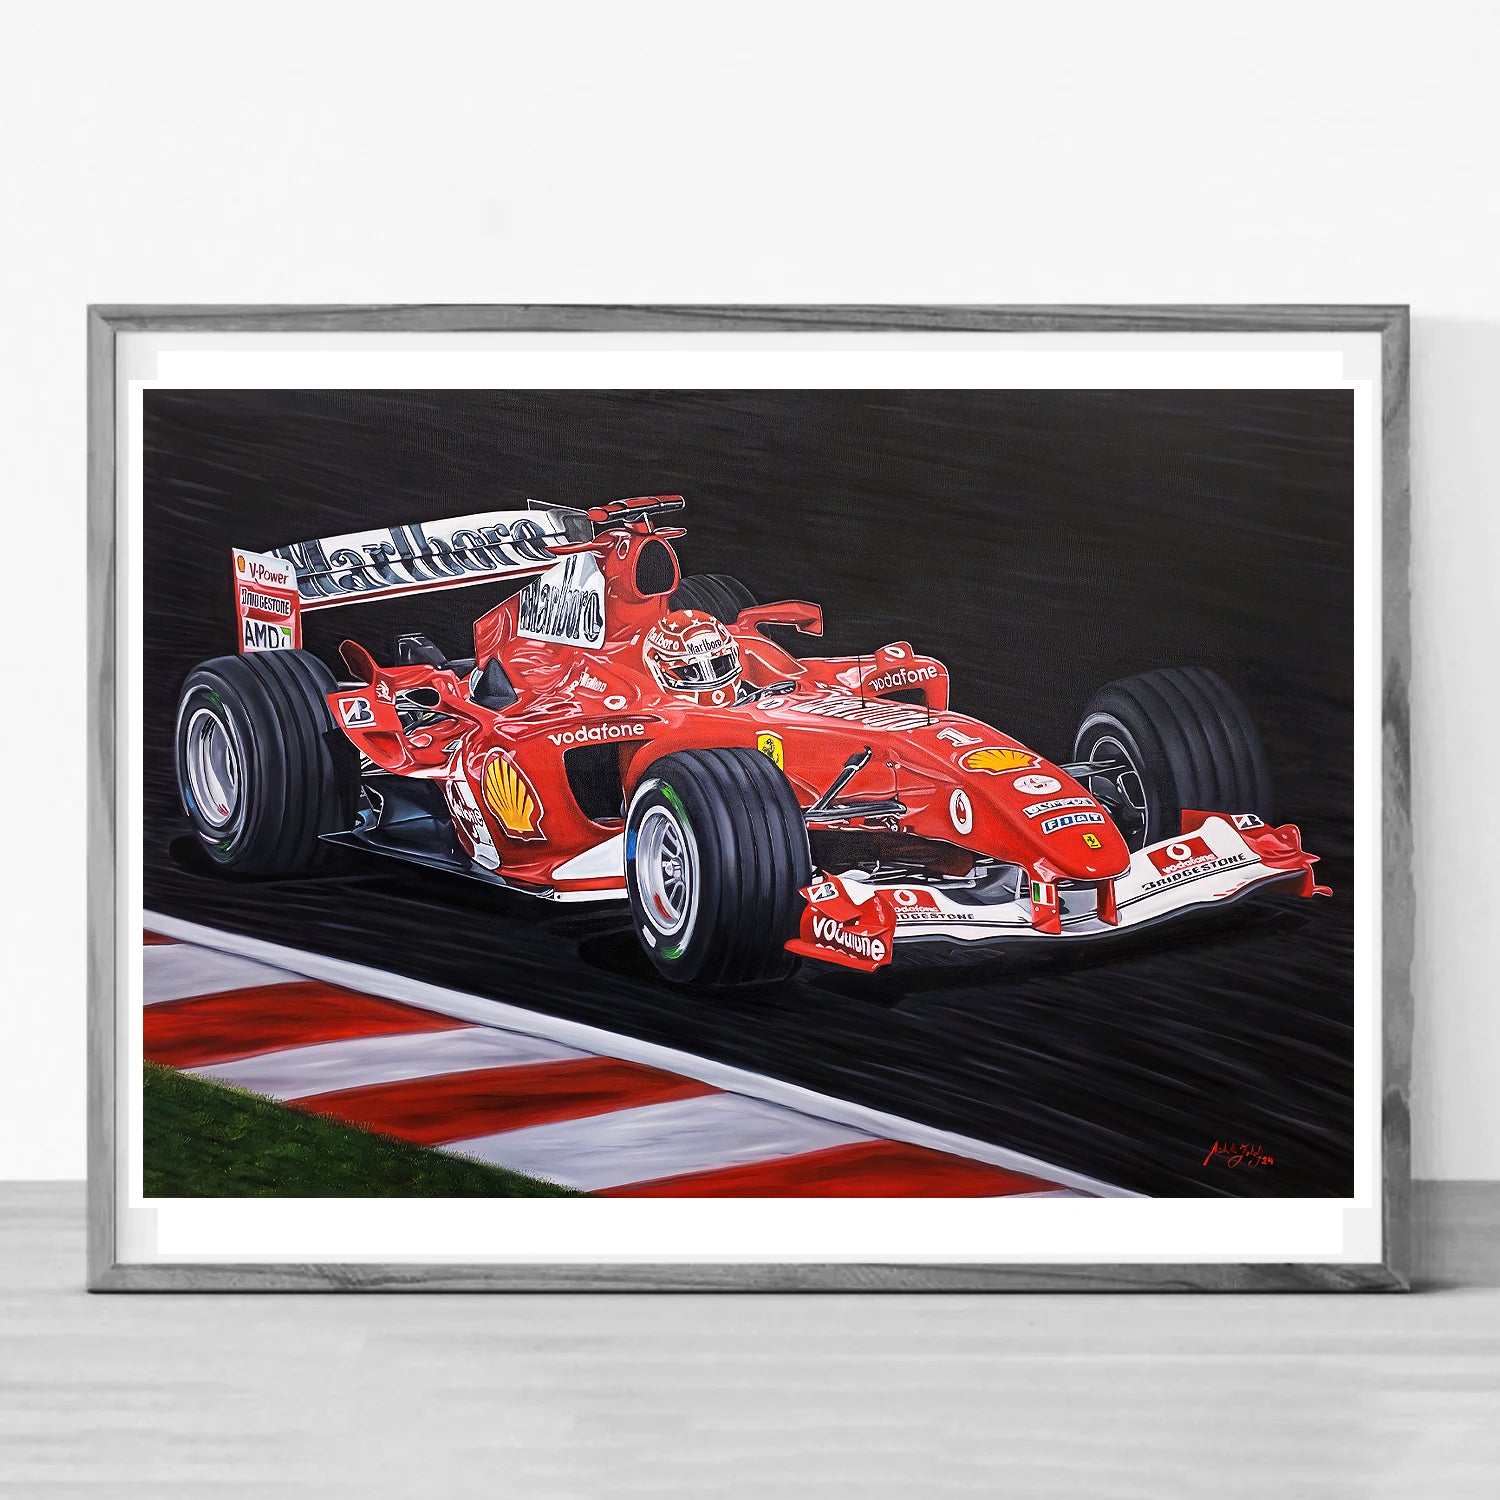 M Schumacher F1 F2004 Painting Limited Edition Canvas Print